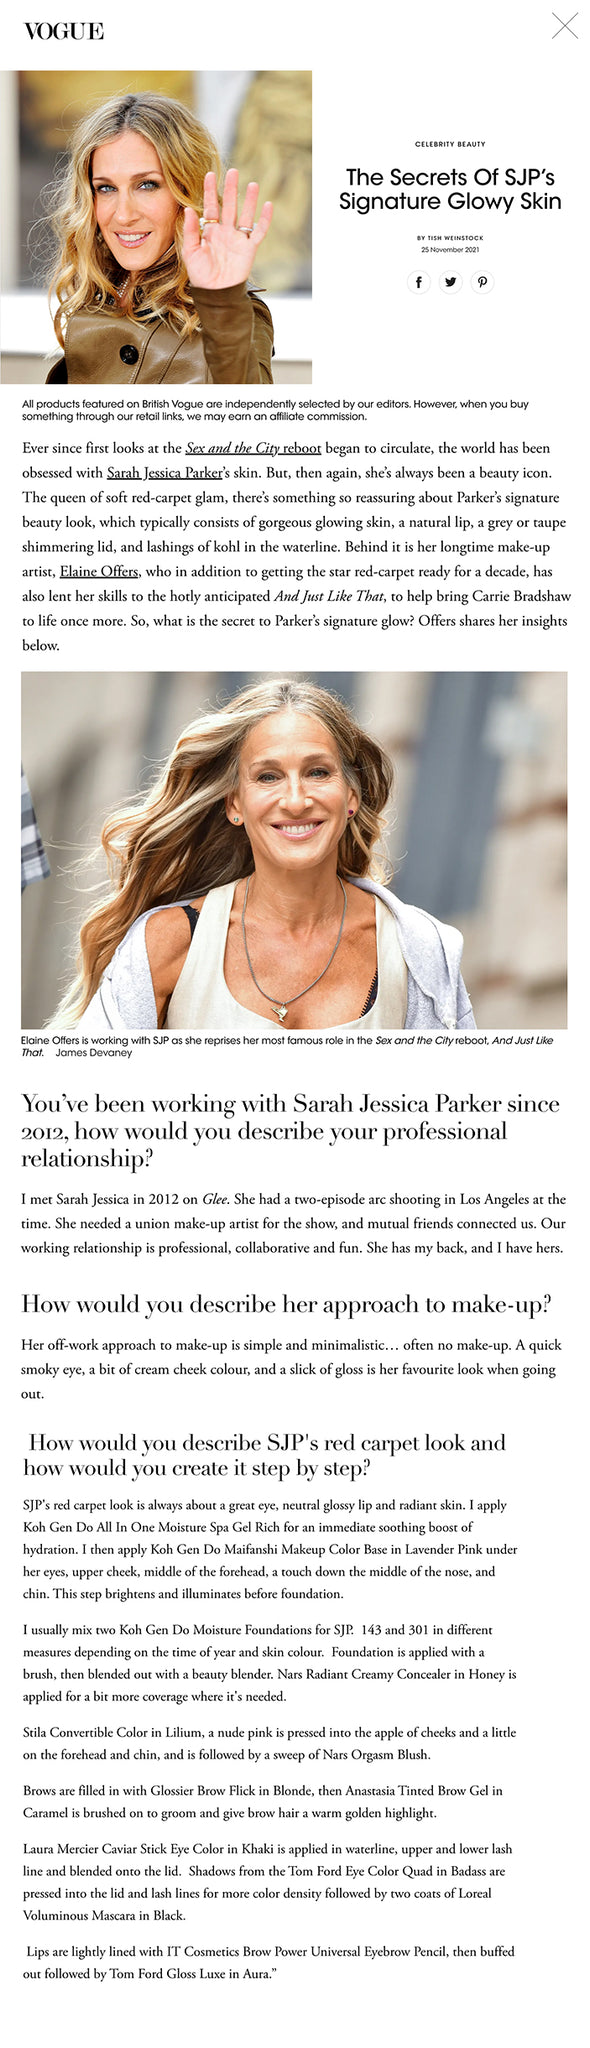 Ever since first looks at the Sex and the City reboot began to circulate, the world has been obsessed with Sarah Jessica Parker’s skin. But, then again, she’s always been a beauty icon. The queen of soft red-carpet glam, there’s something so reassuring about Parker’s signature beauty look, which typically consists of gorgeous glowing skin, a natural lip, a grey or taupe shimmering lid, and lashings of kohl in the waterline. Behind it is her longtime make-up artist, Elaine Offers, who in addition to getting the star red-carpet ready for a decade, has also lent her skills to the hotly anticipated And Just Like That, to help bring Carrie Bradshaw to life once more. So, what is the secret to Parker’s signature glow? Offers shares her insights below.